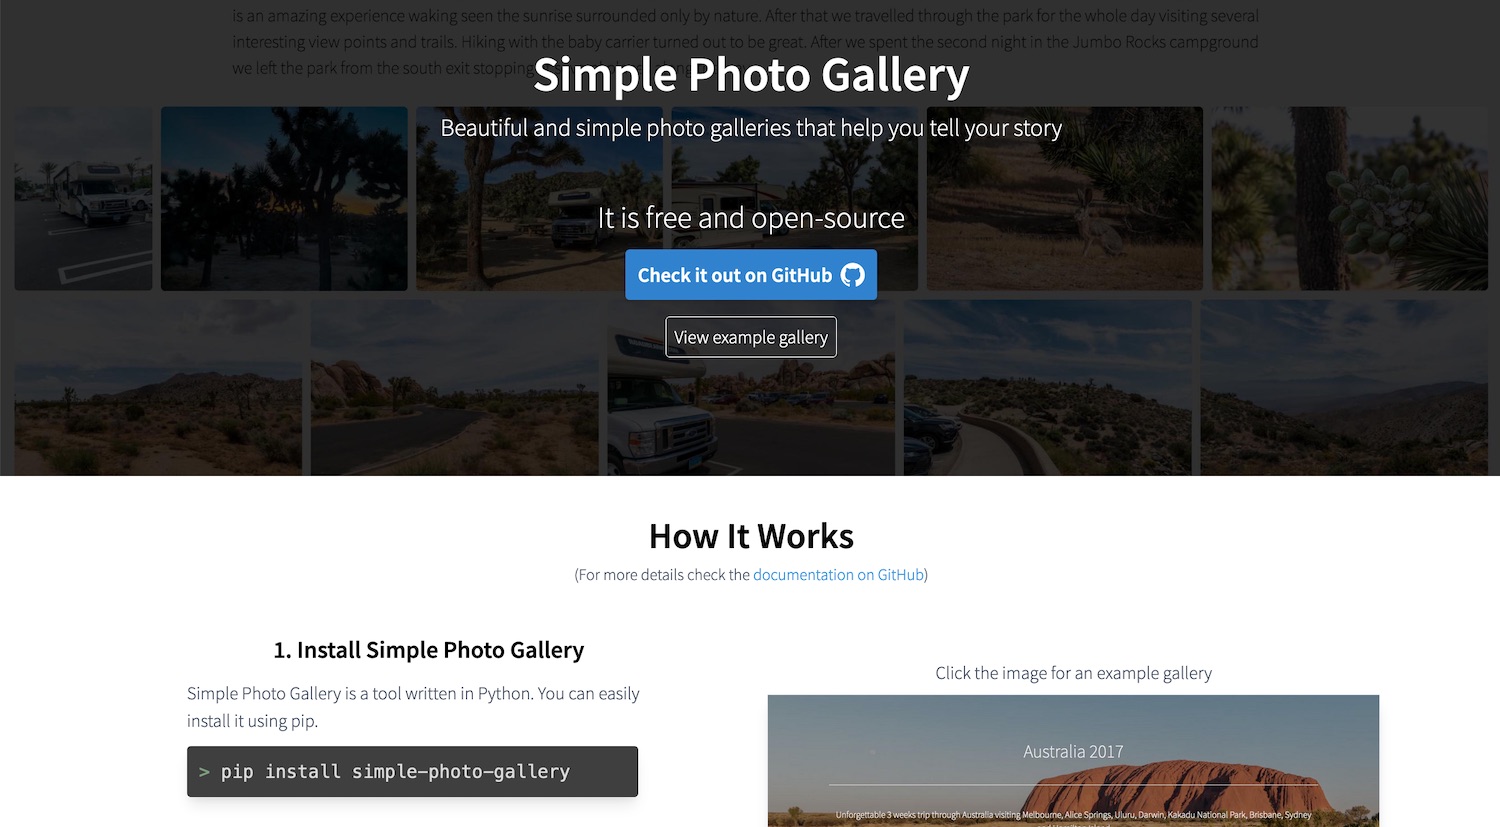 Landing page for Simple Photo Gallery